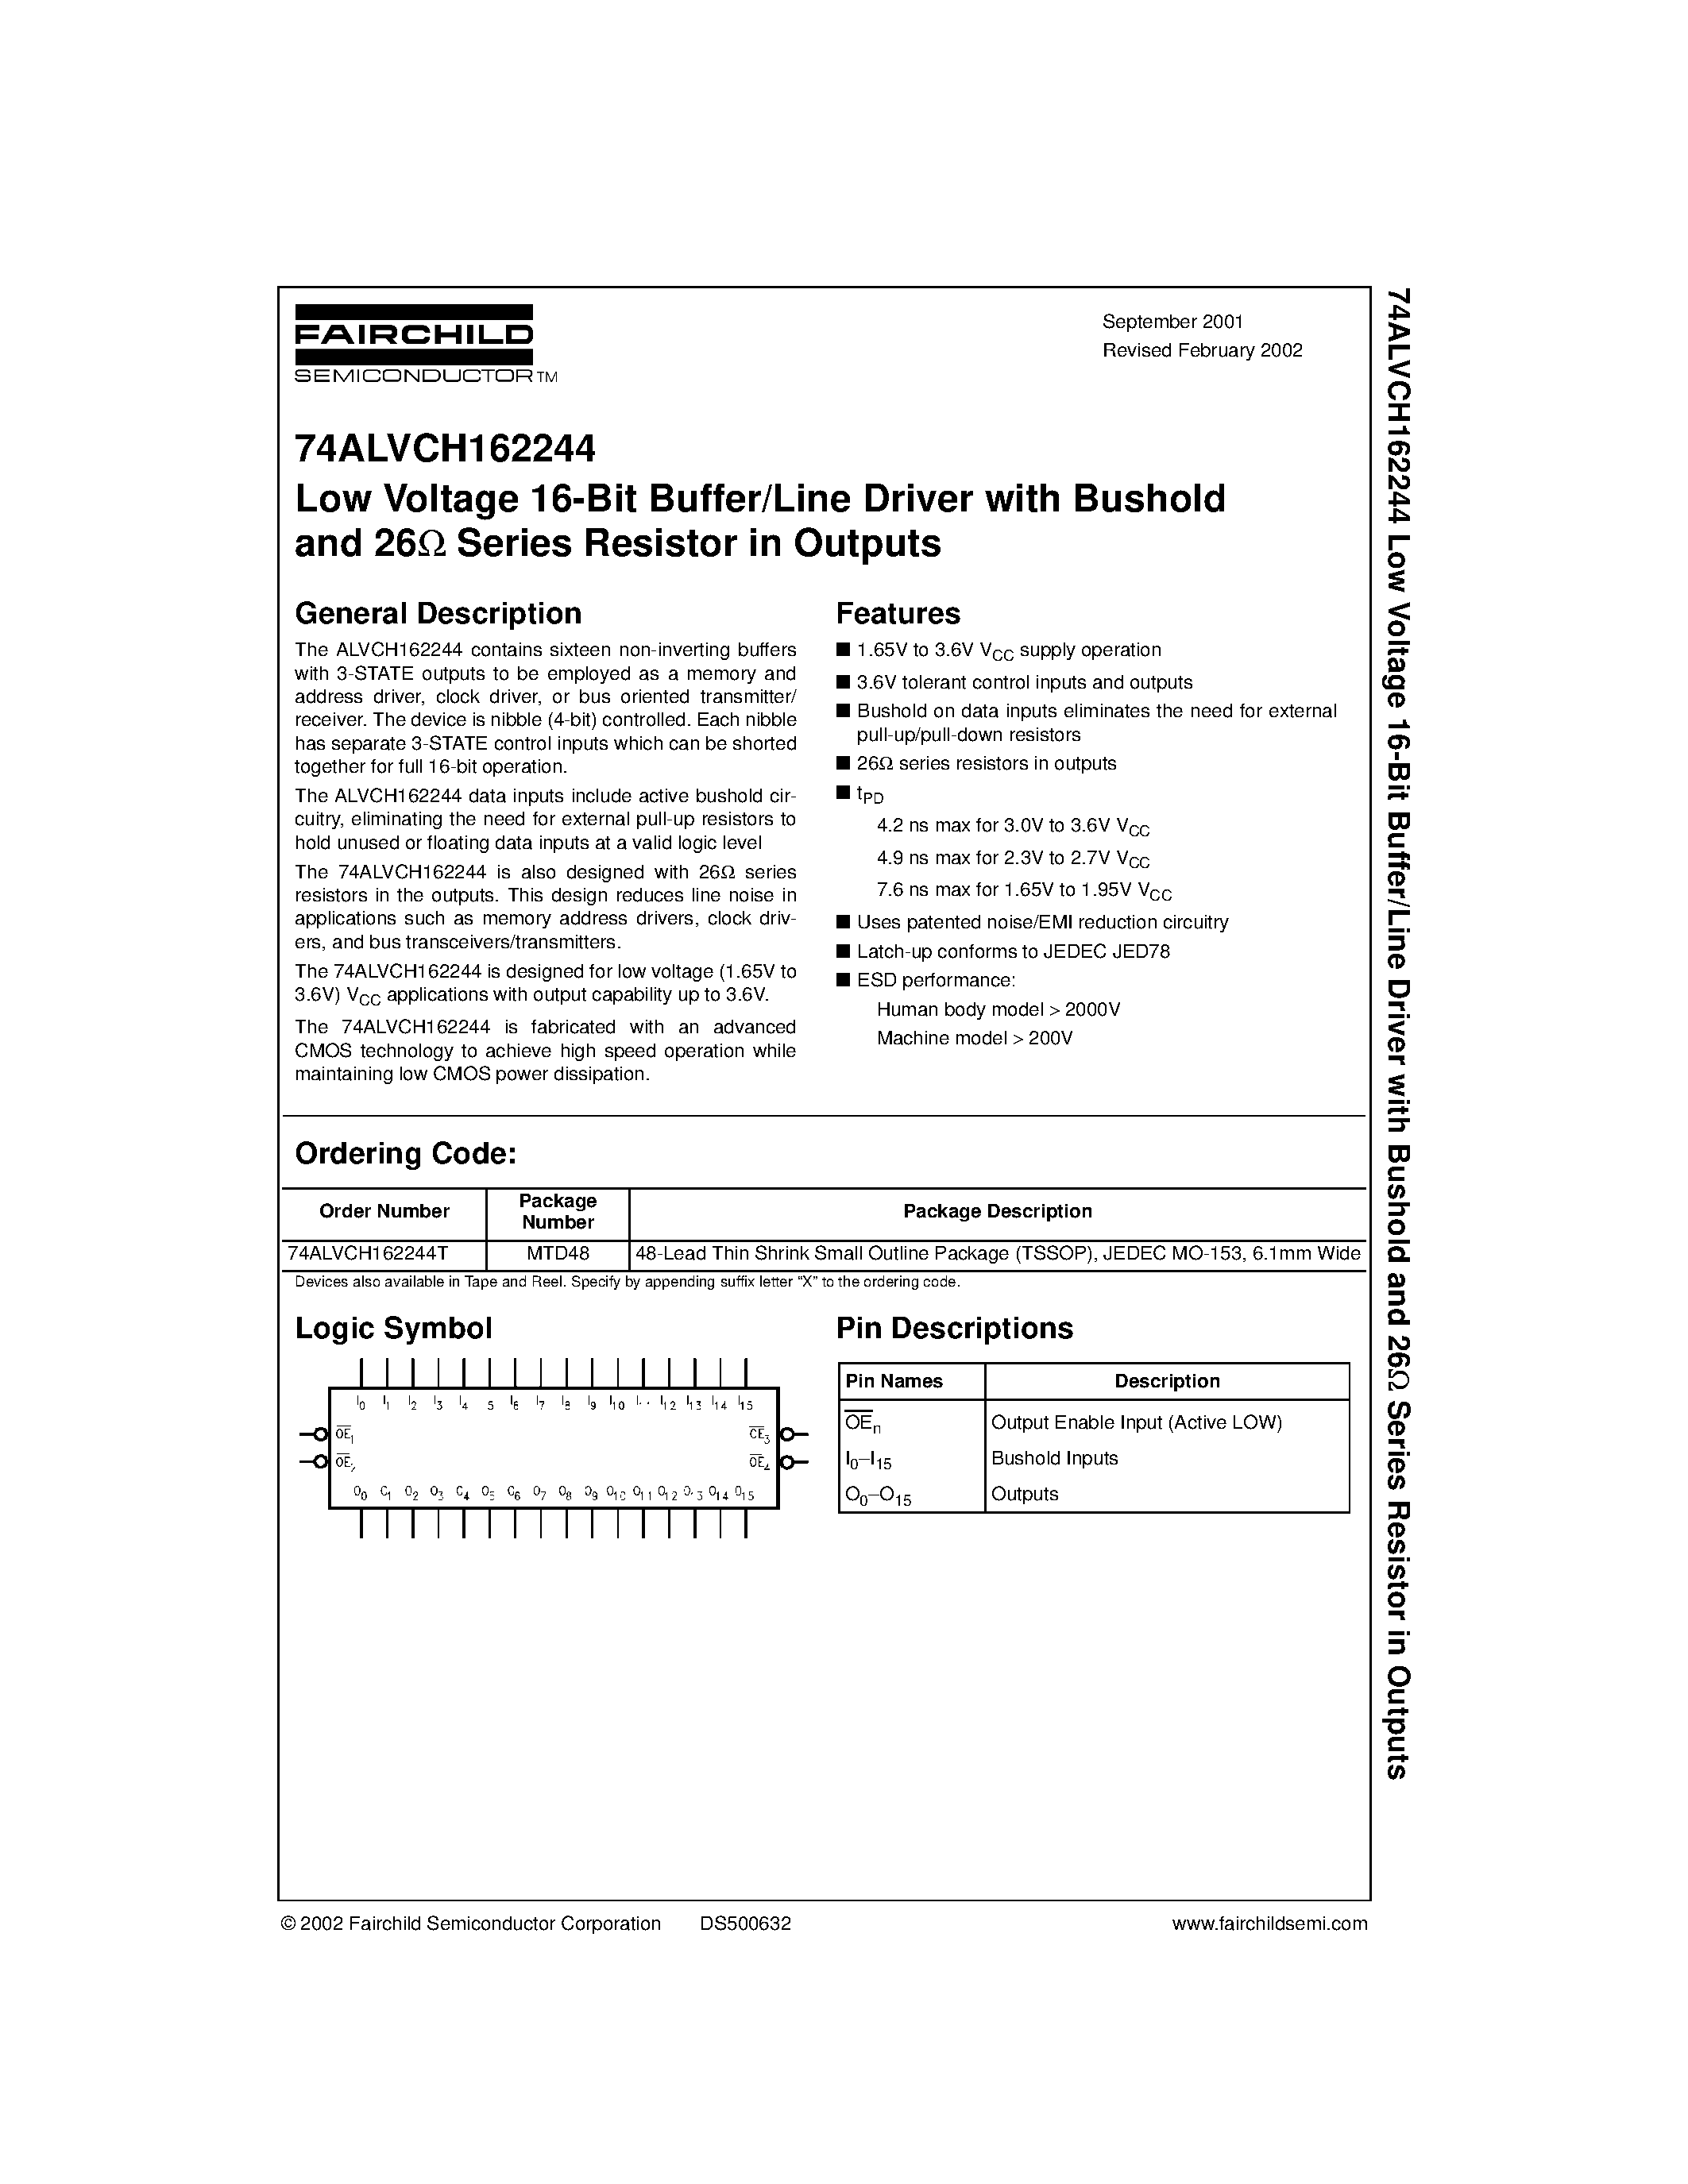 Datasheet 74ALVCH162244 - Low Voltage 16-Bit Buffer/Line Driver with Bushold and 26 Series Resistor in Outputs page 1